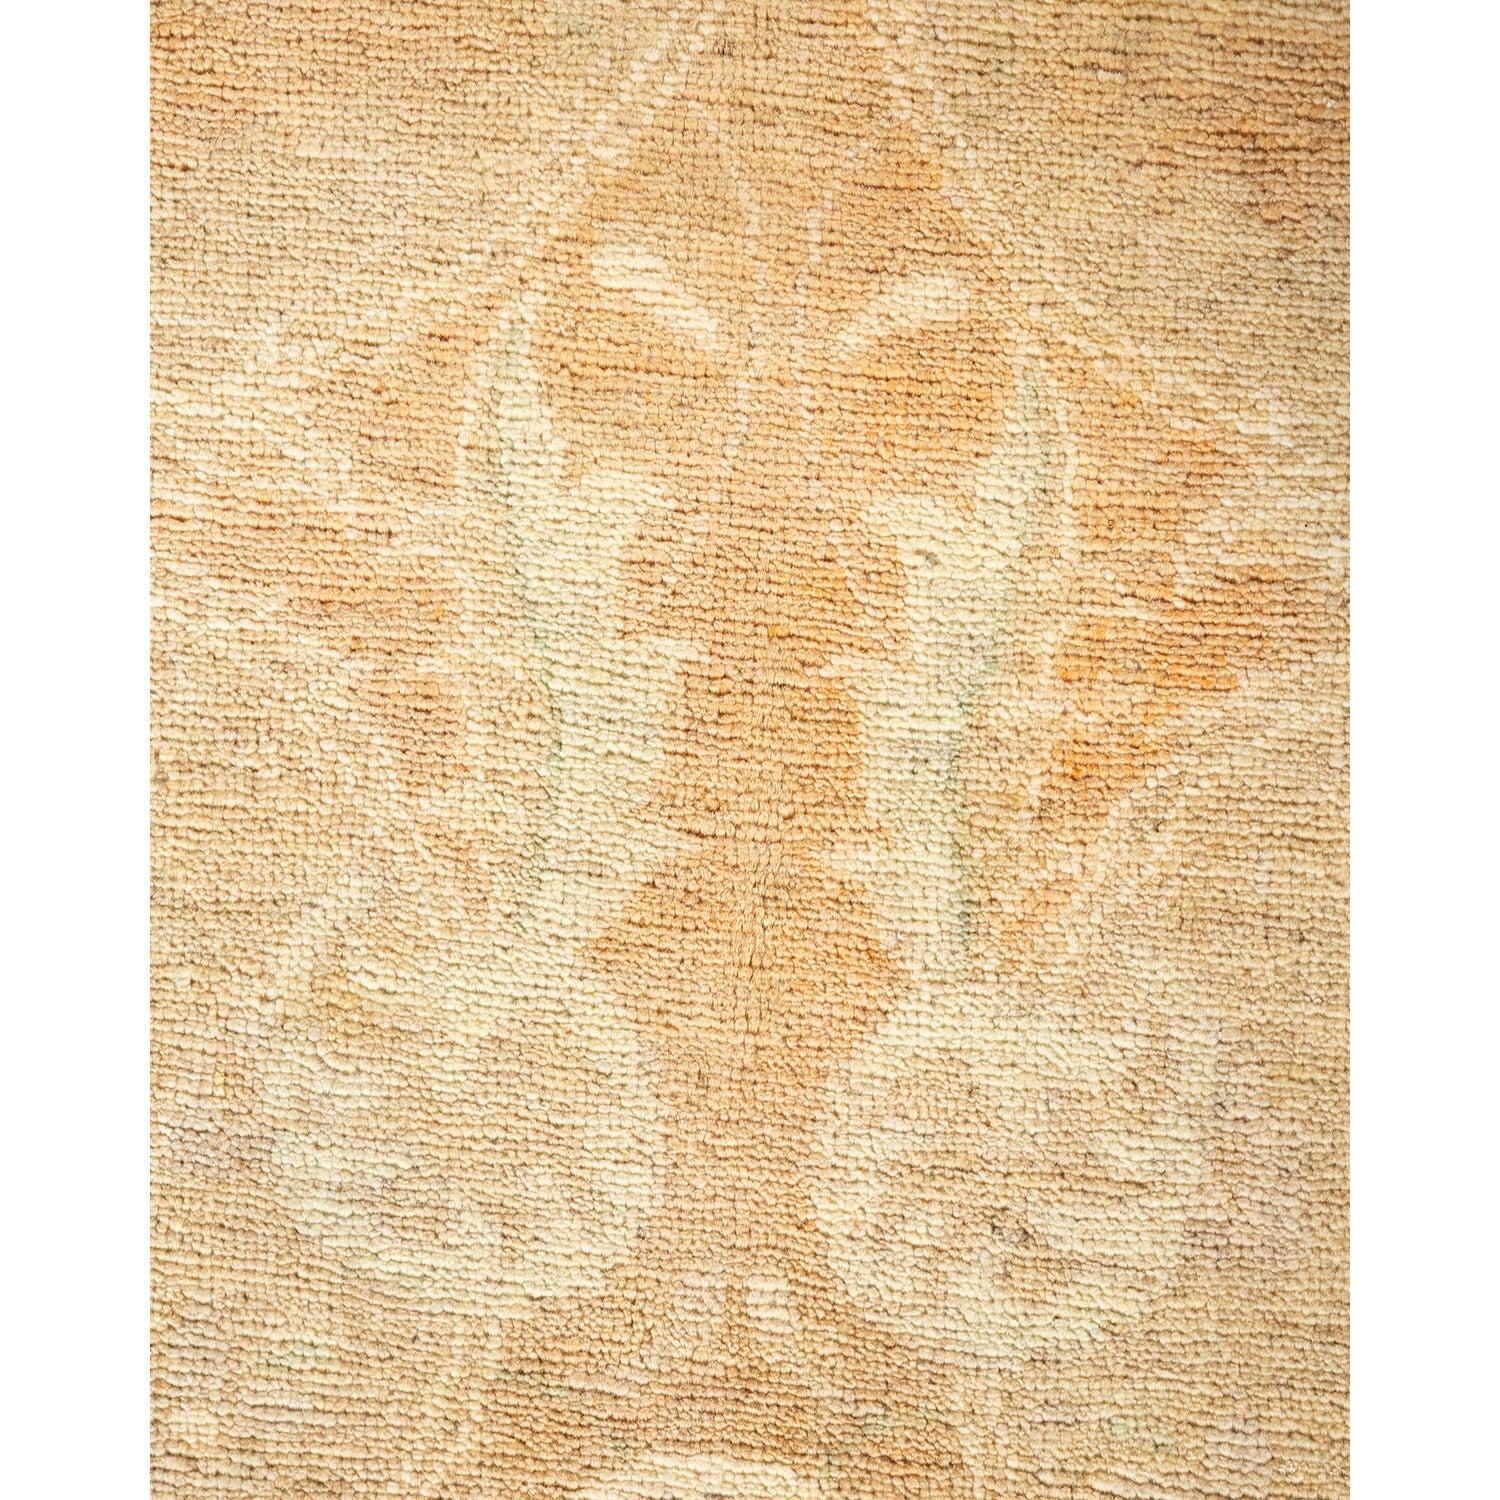 Close-up of a floral patterned rug with beige and cream tones.